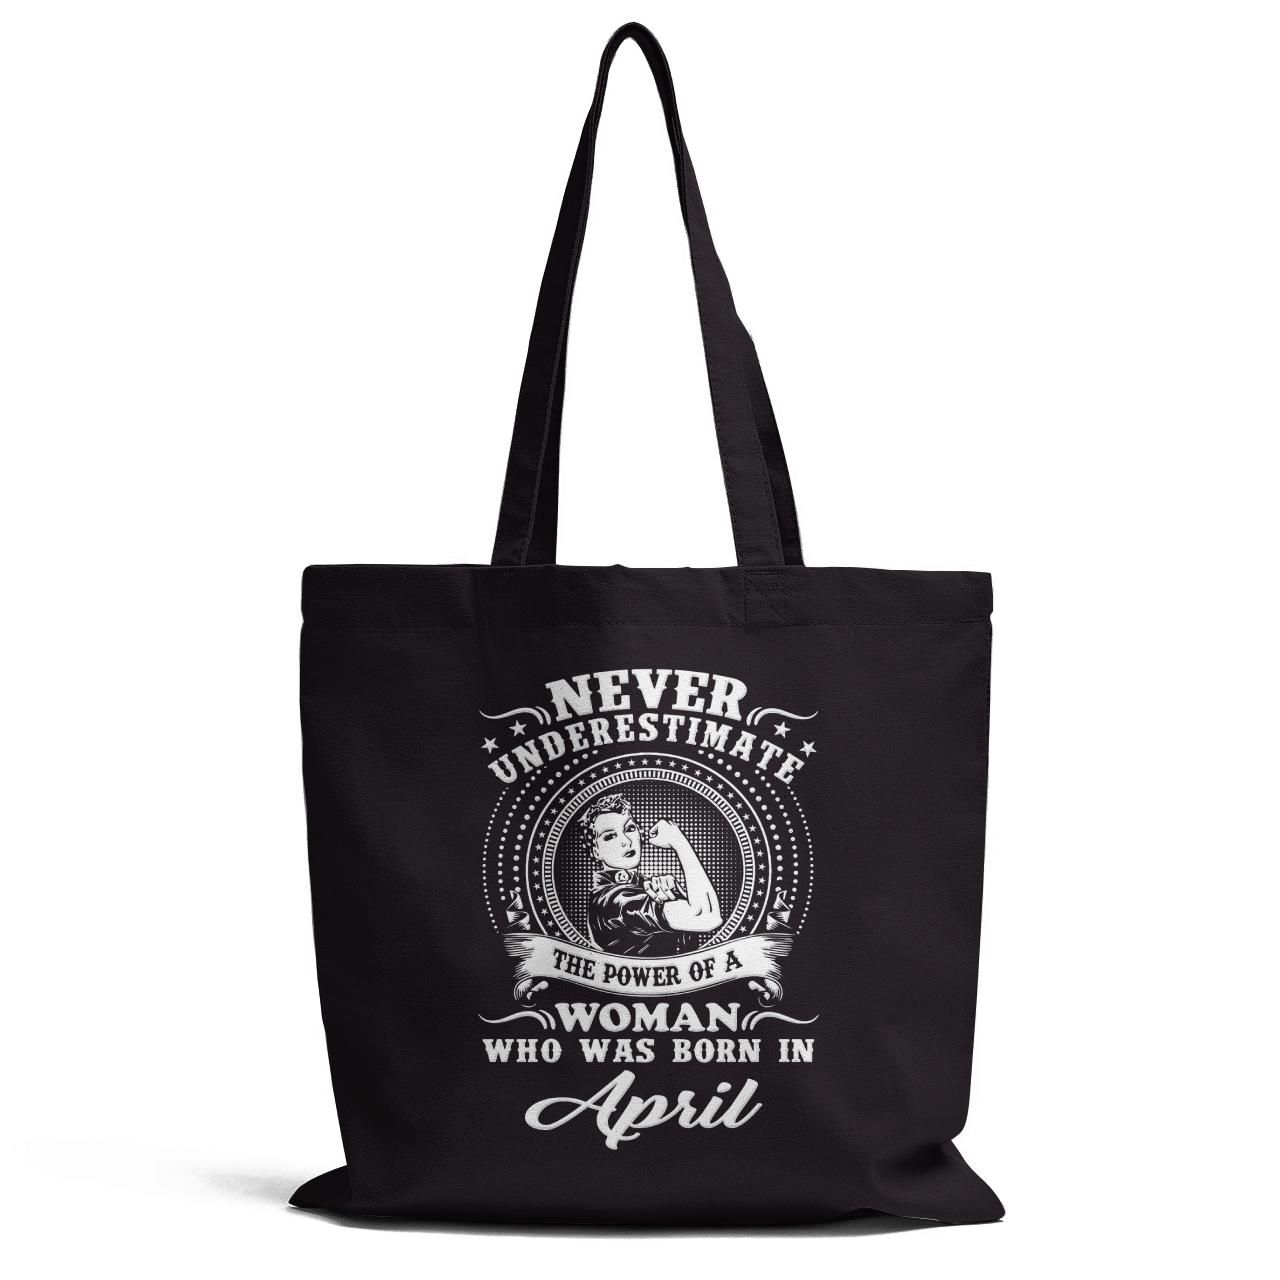 Never Underestimate Who Was Born April Tote Bag